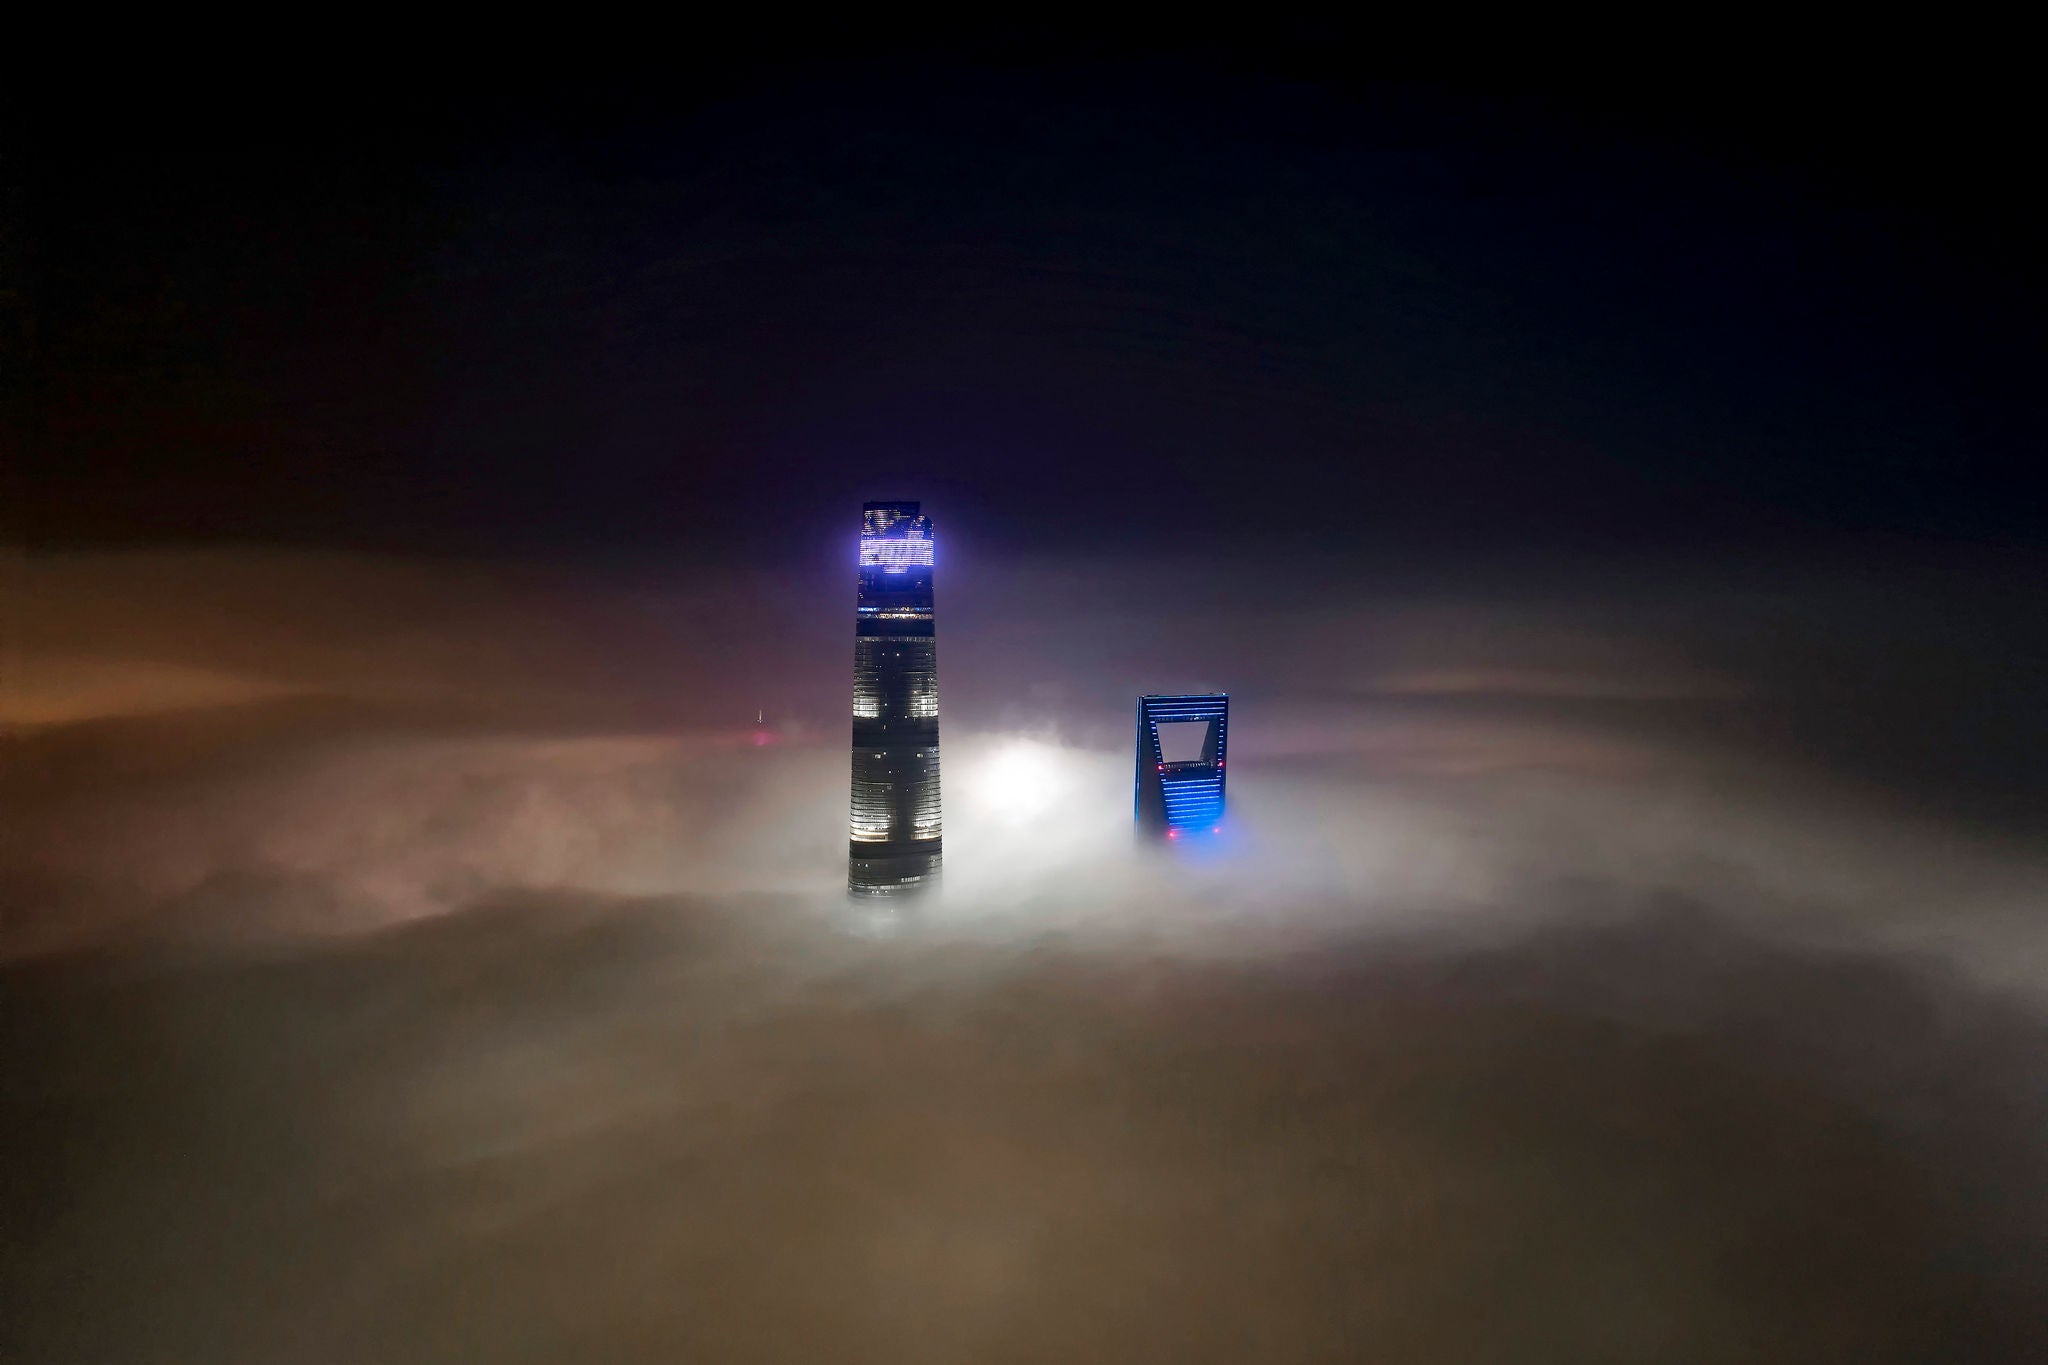 Shanghai tower and Shanghai world financial poke out of the fog at night